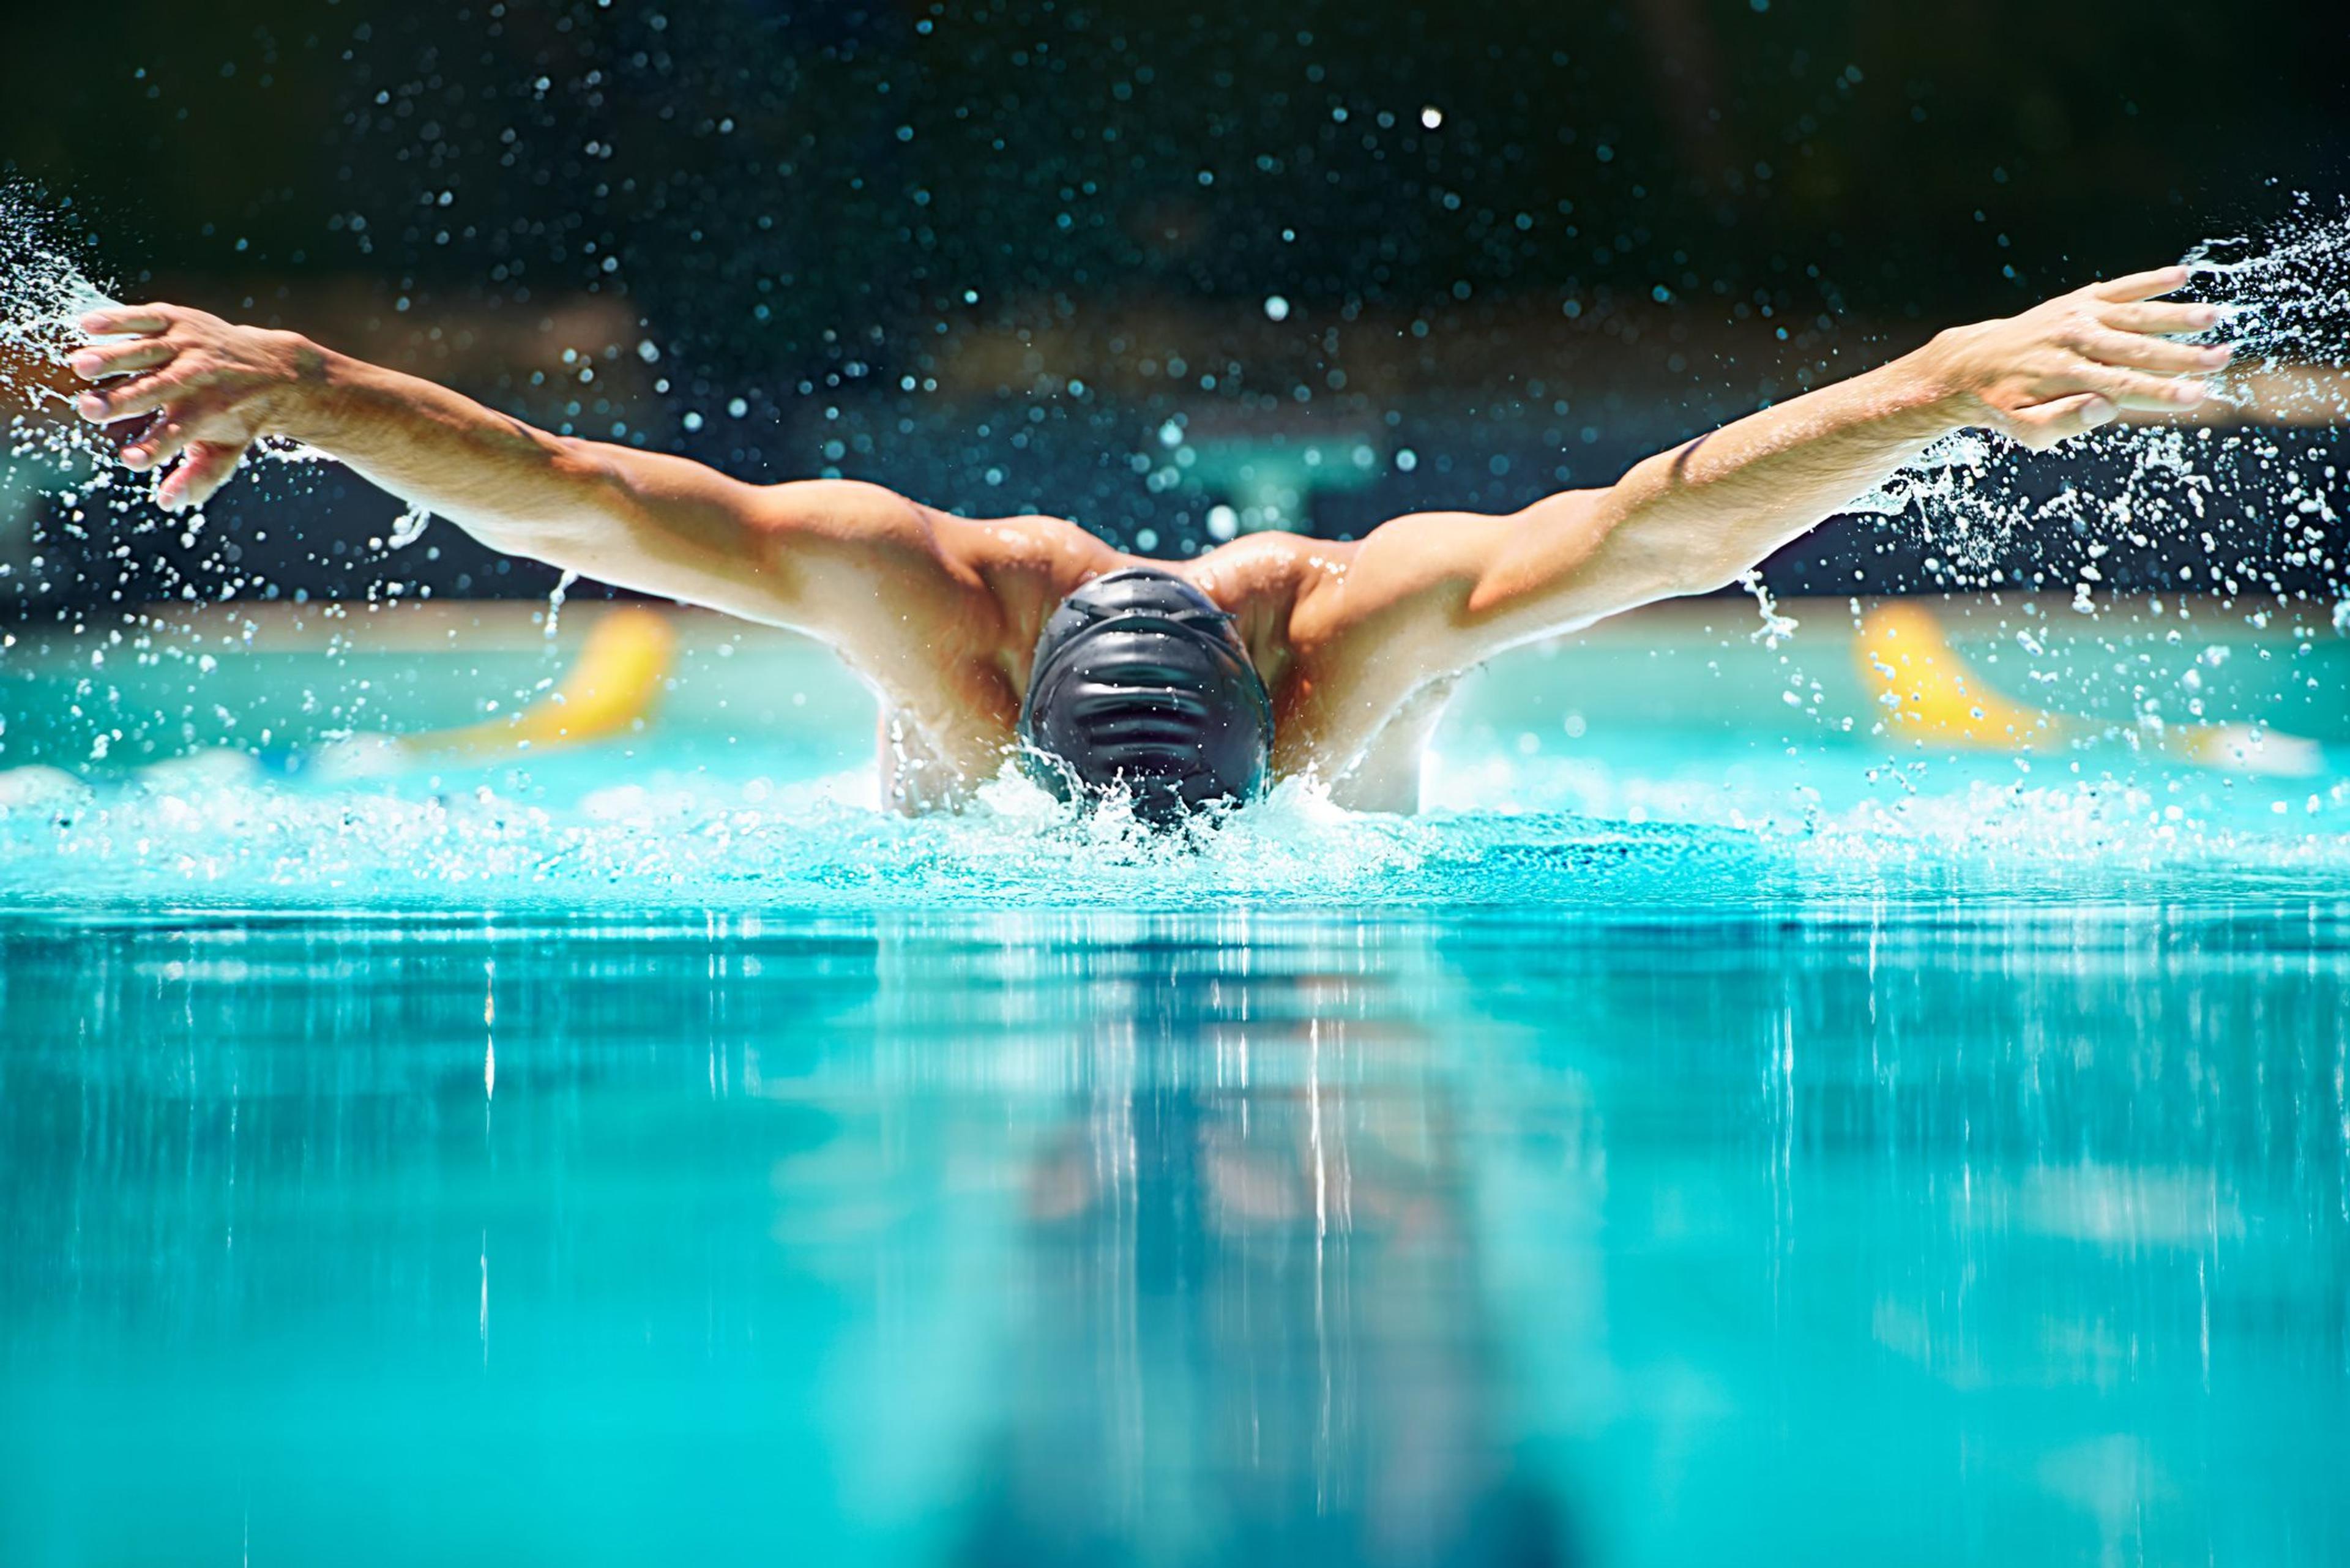 A swimmer completes a butterfly stroke in the pool